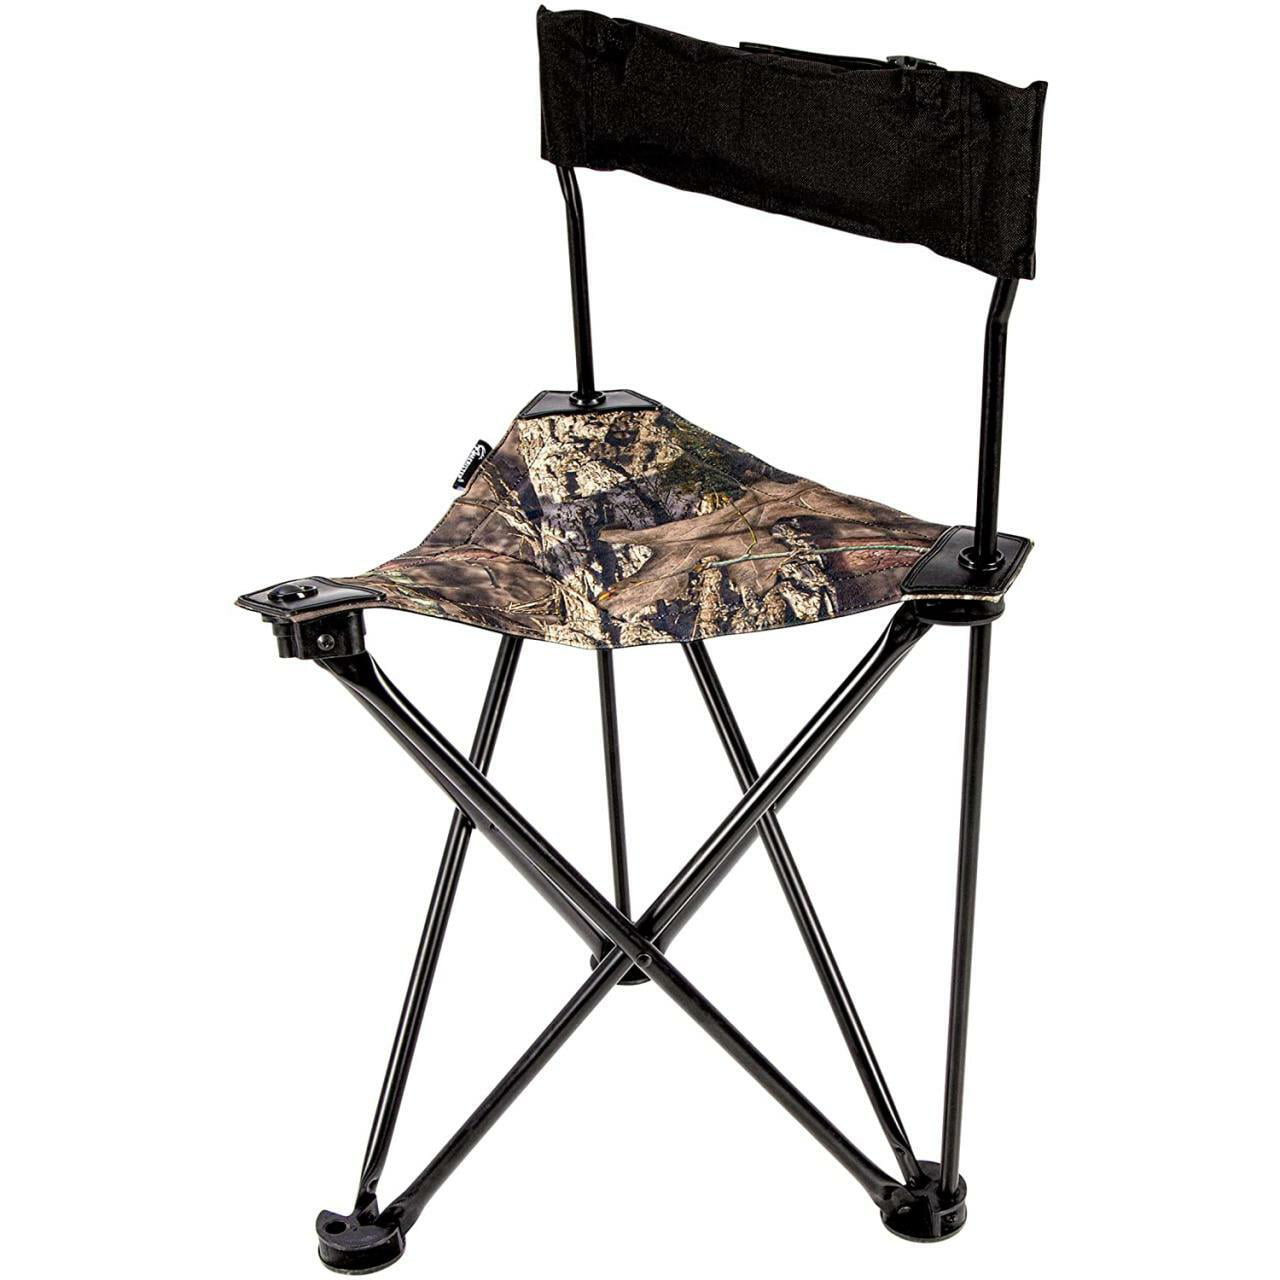 CampActive Folding Portable Camping Tripod Stool Chair Seat with Metal Frame 